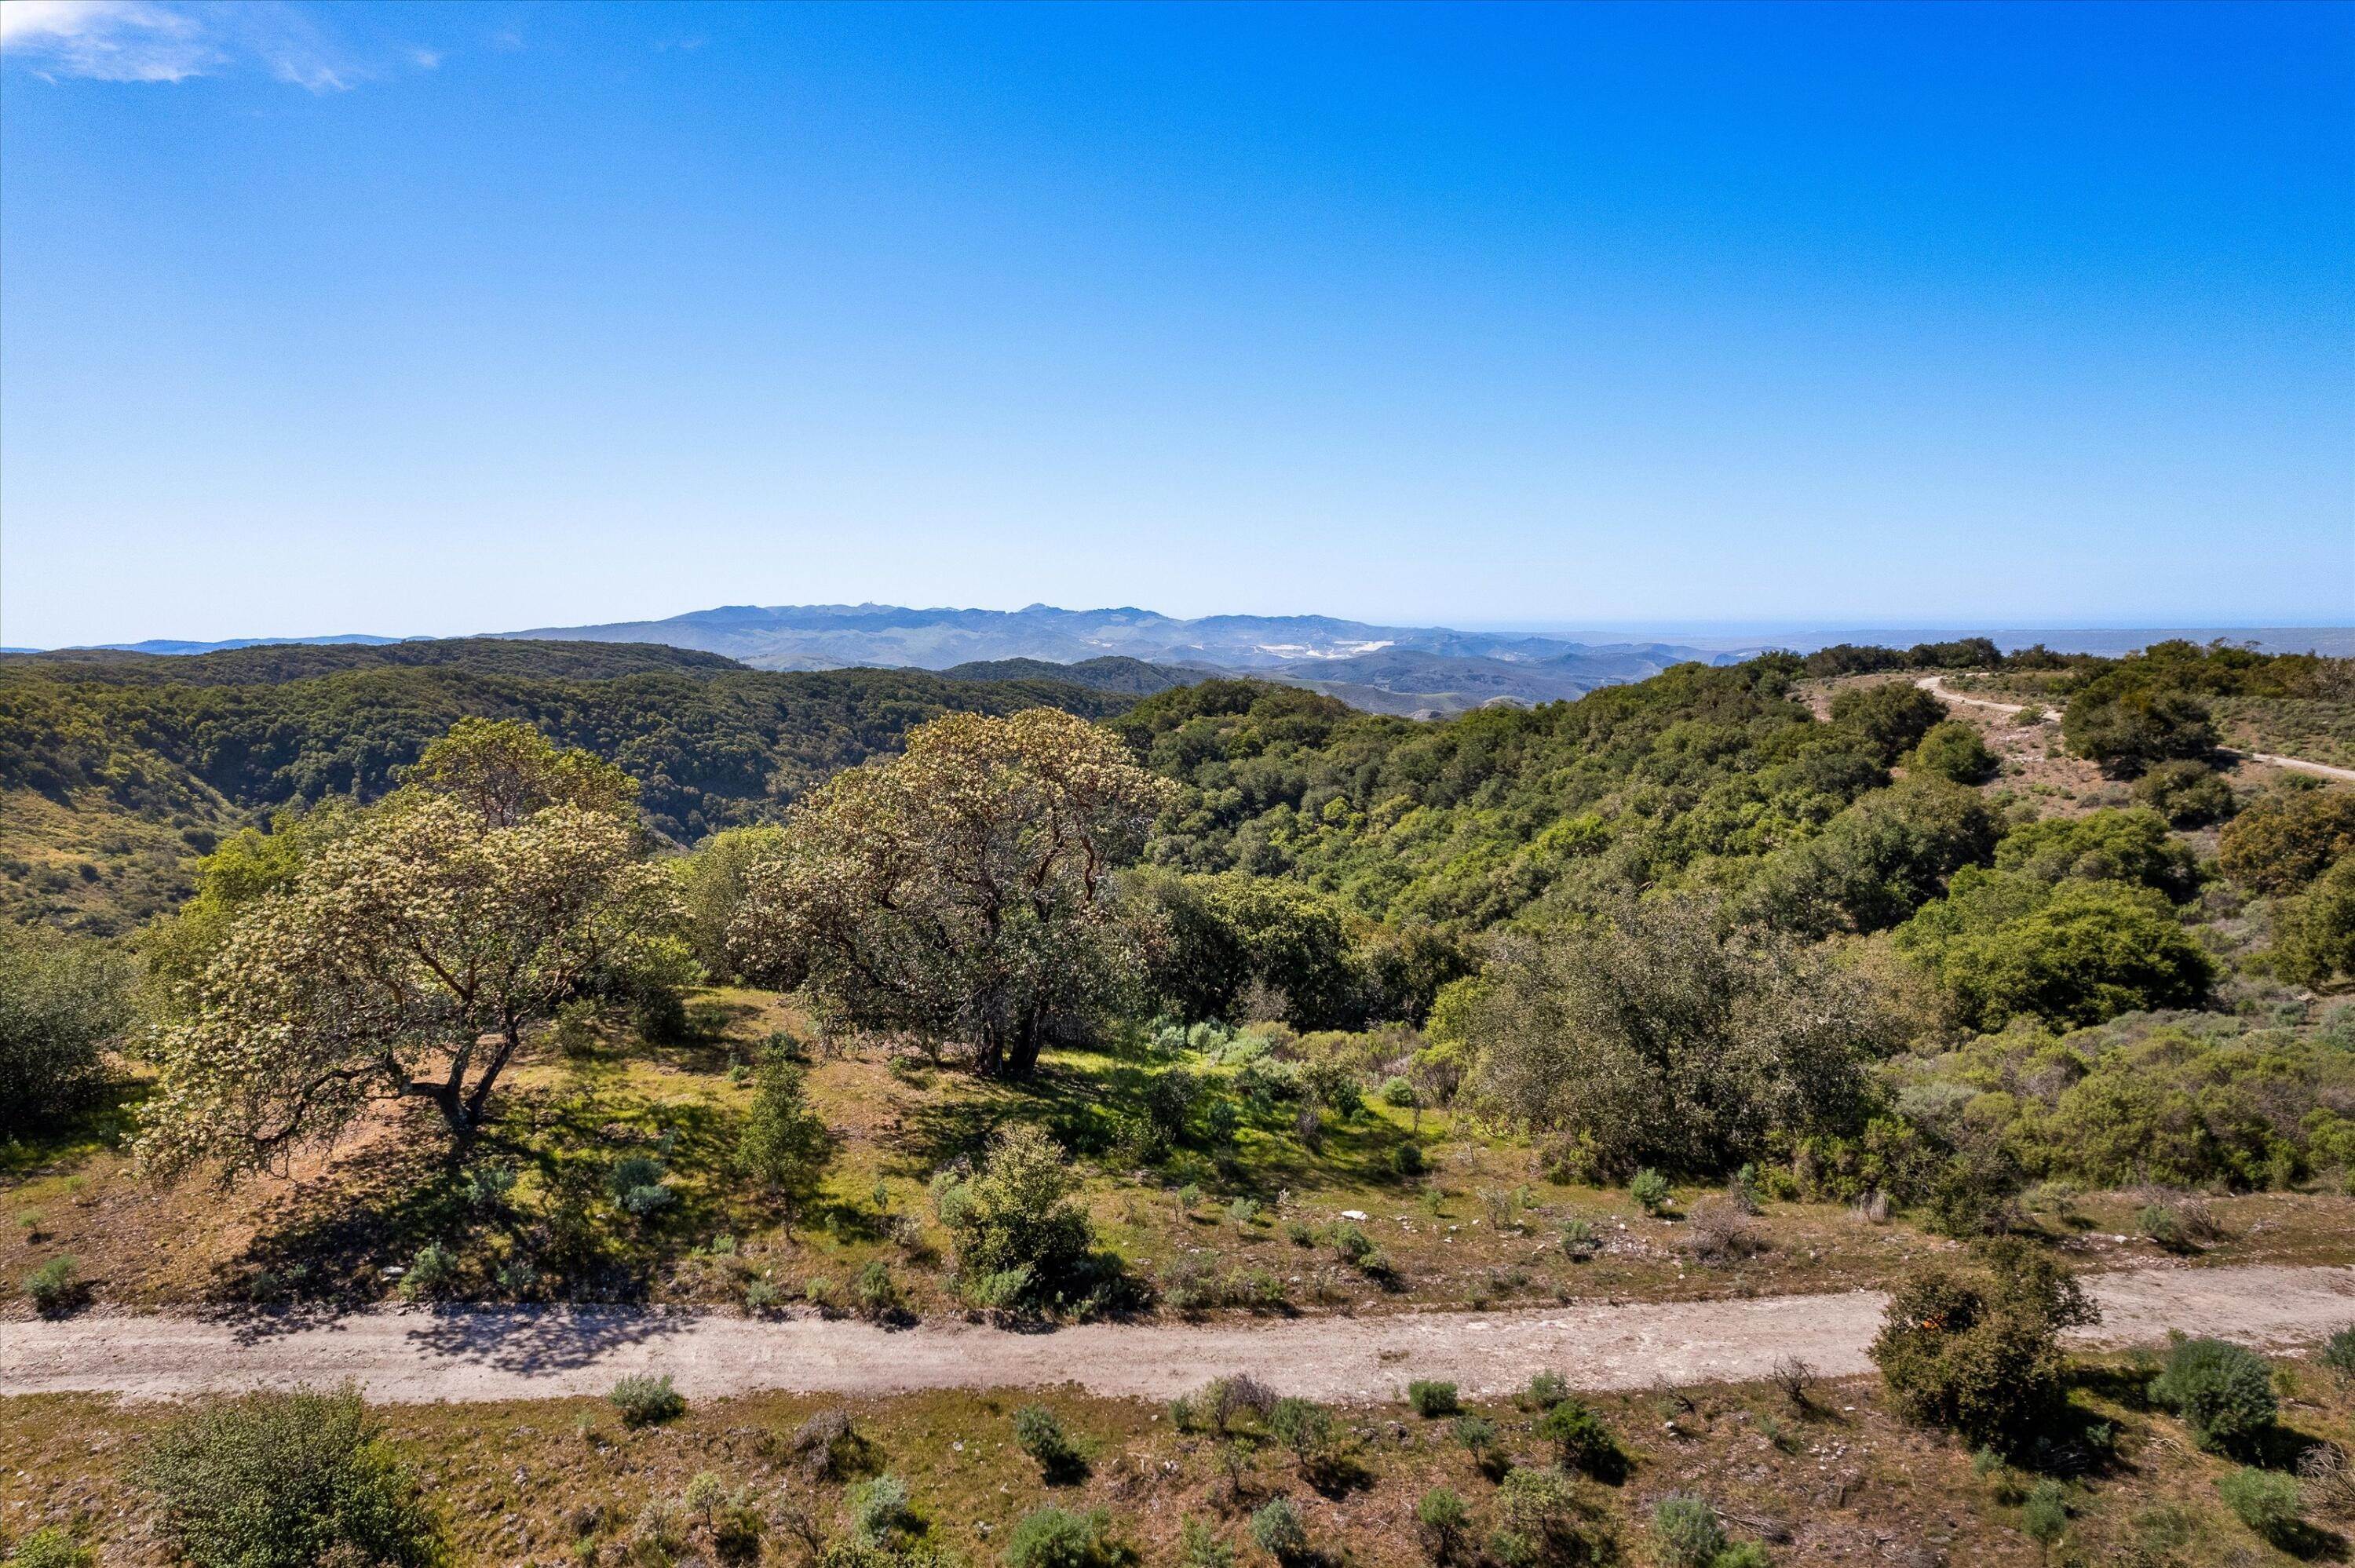 16. Farm and Ranch Properties for Sale at 5930 Santa Rosa Road Lompoc, California 93436 United States